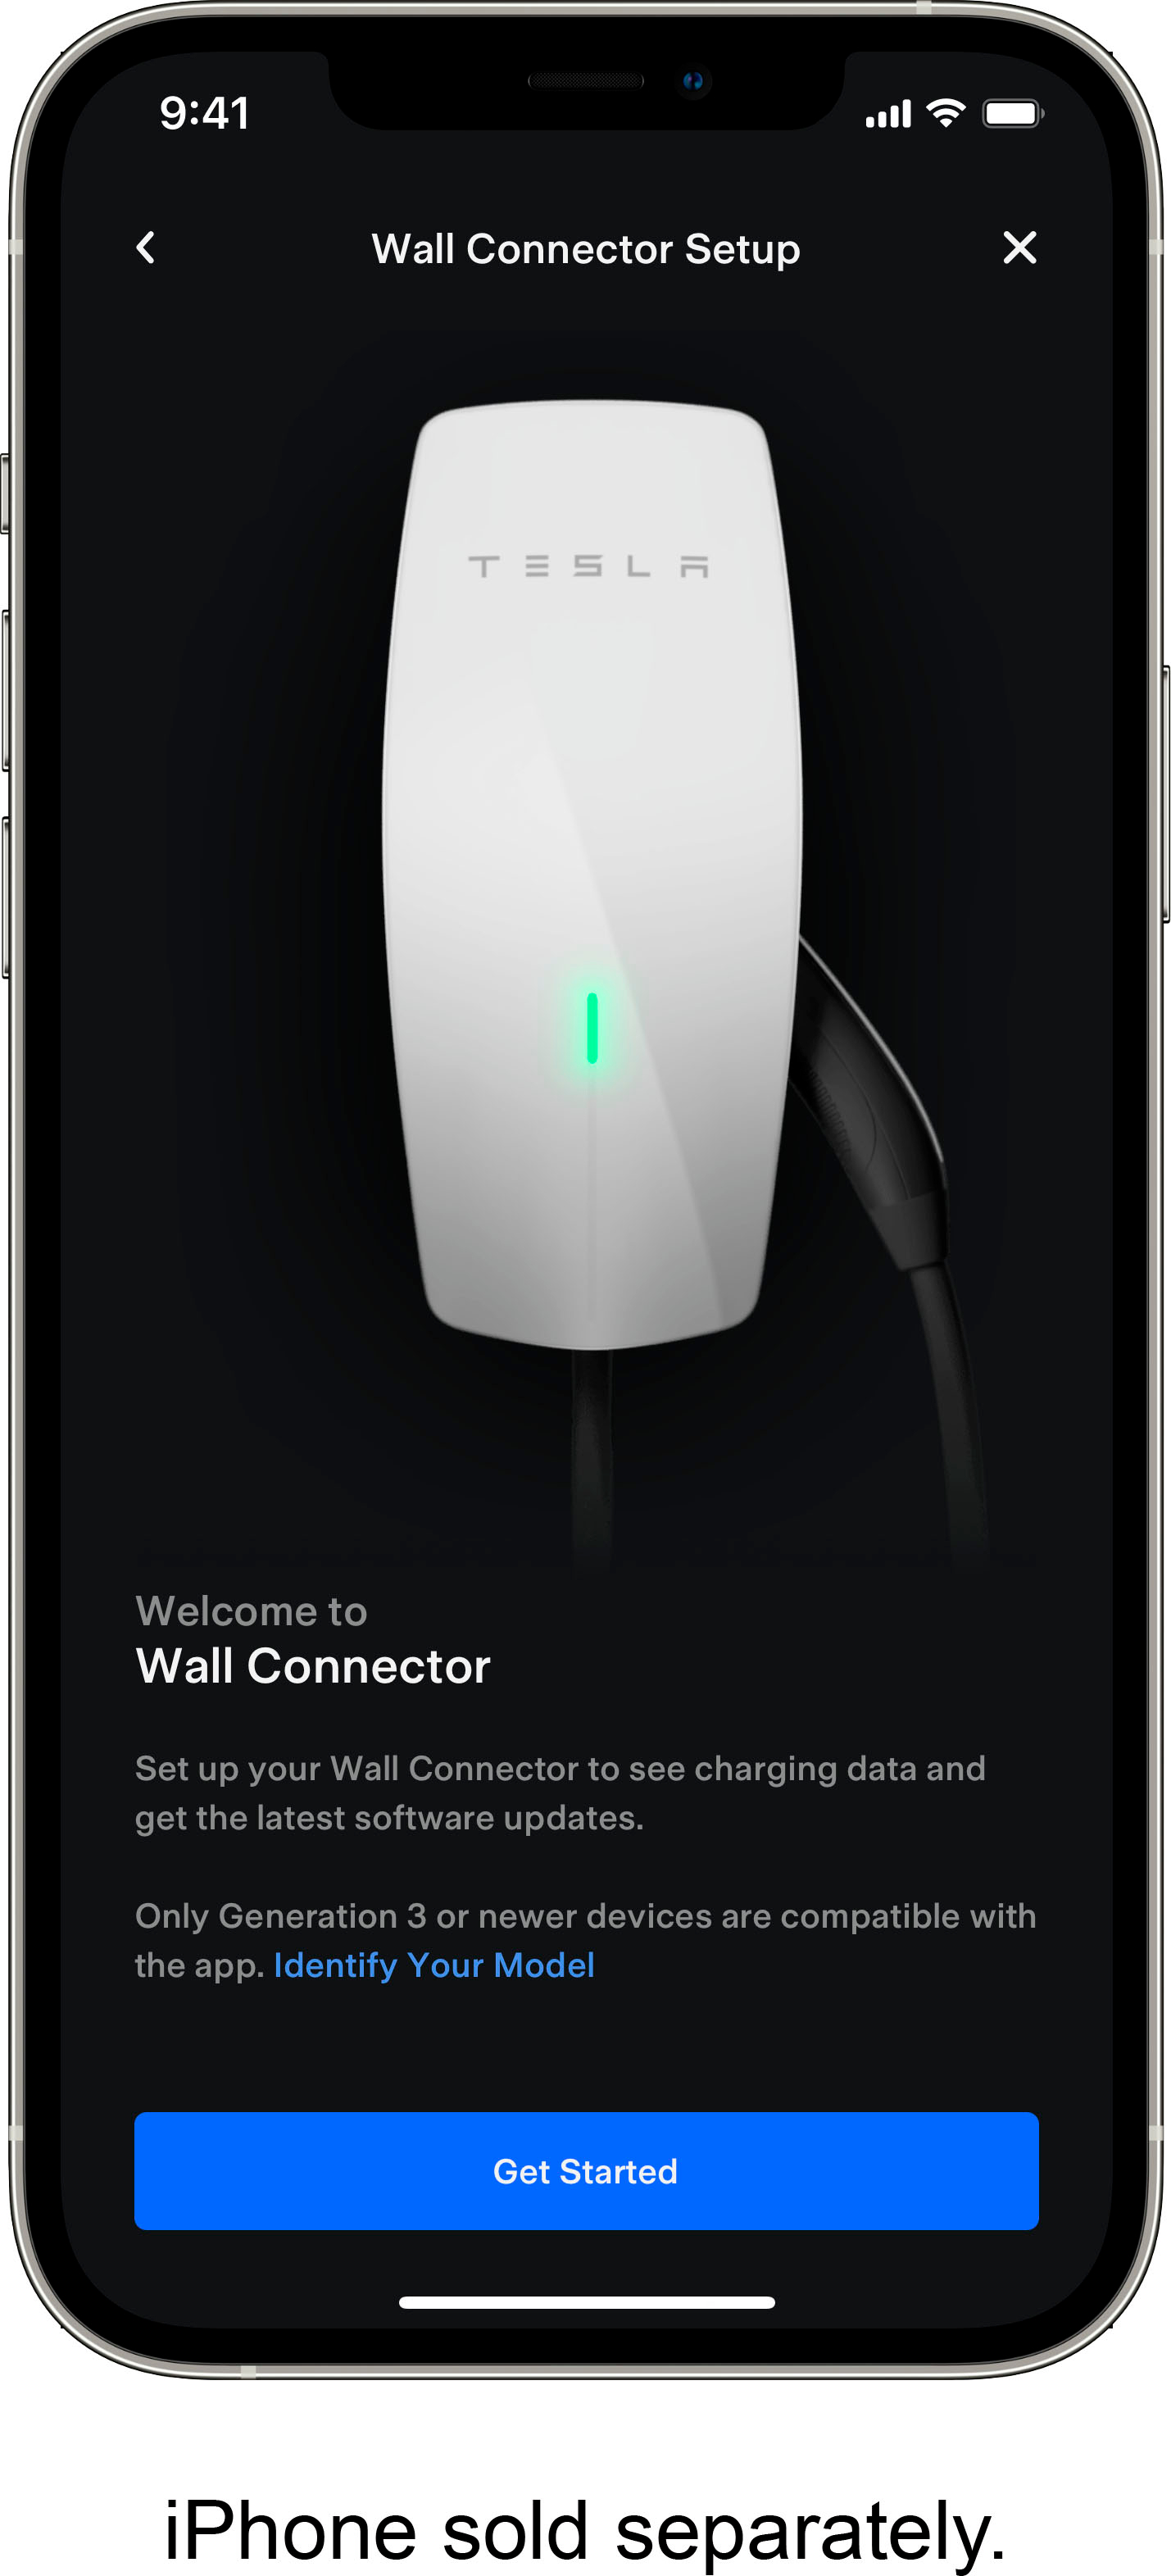 Tesla Launches All-New Universal Wall Connector: Specs and Features